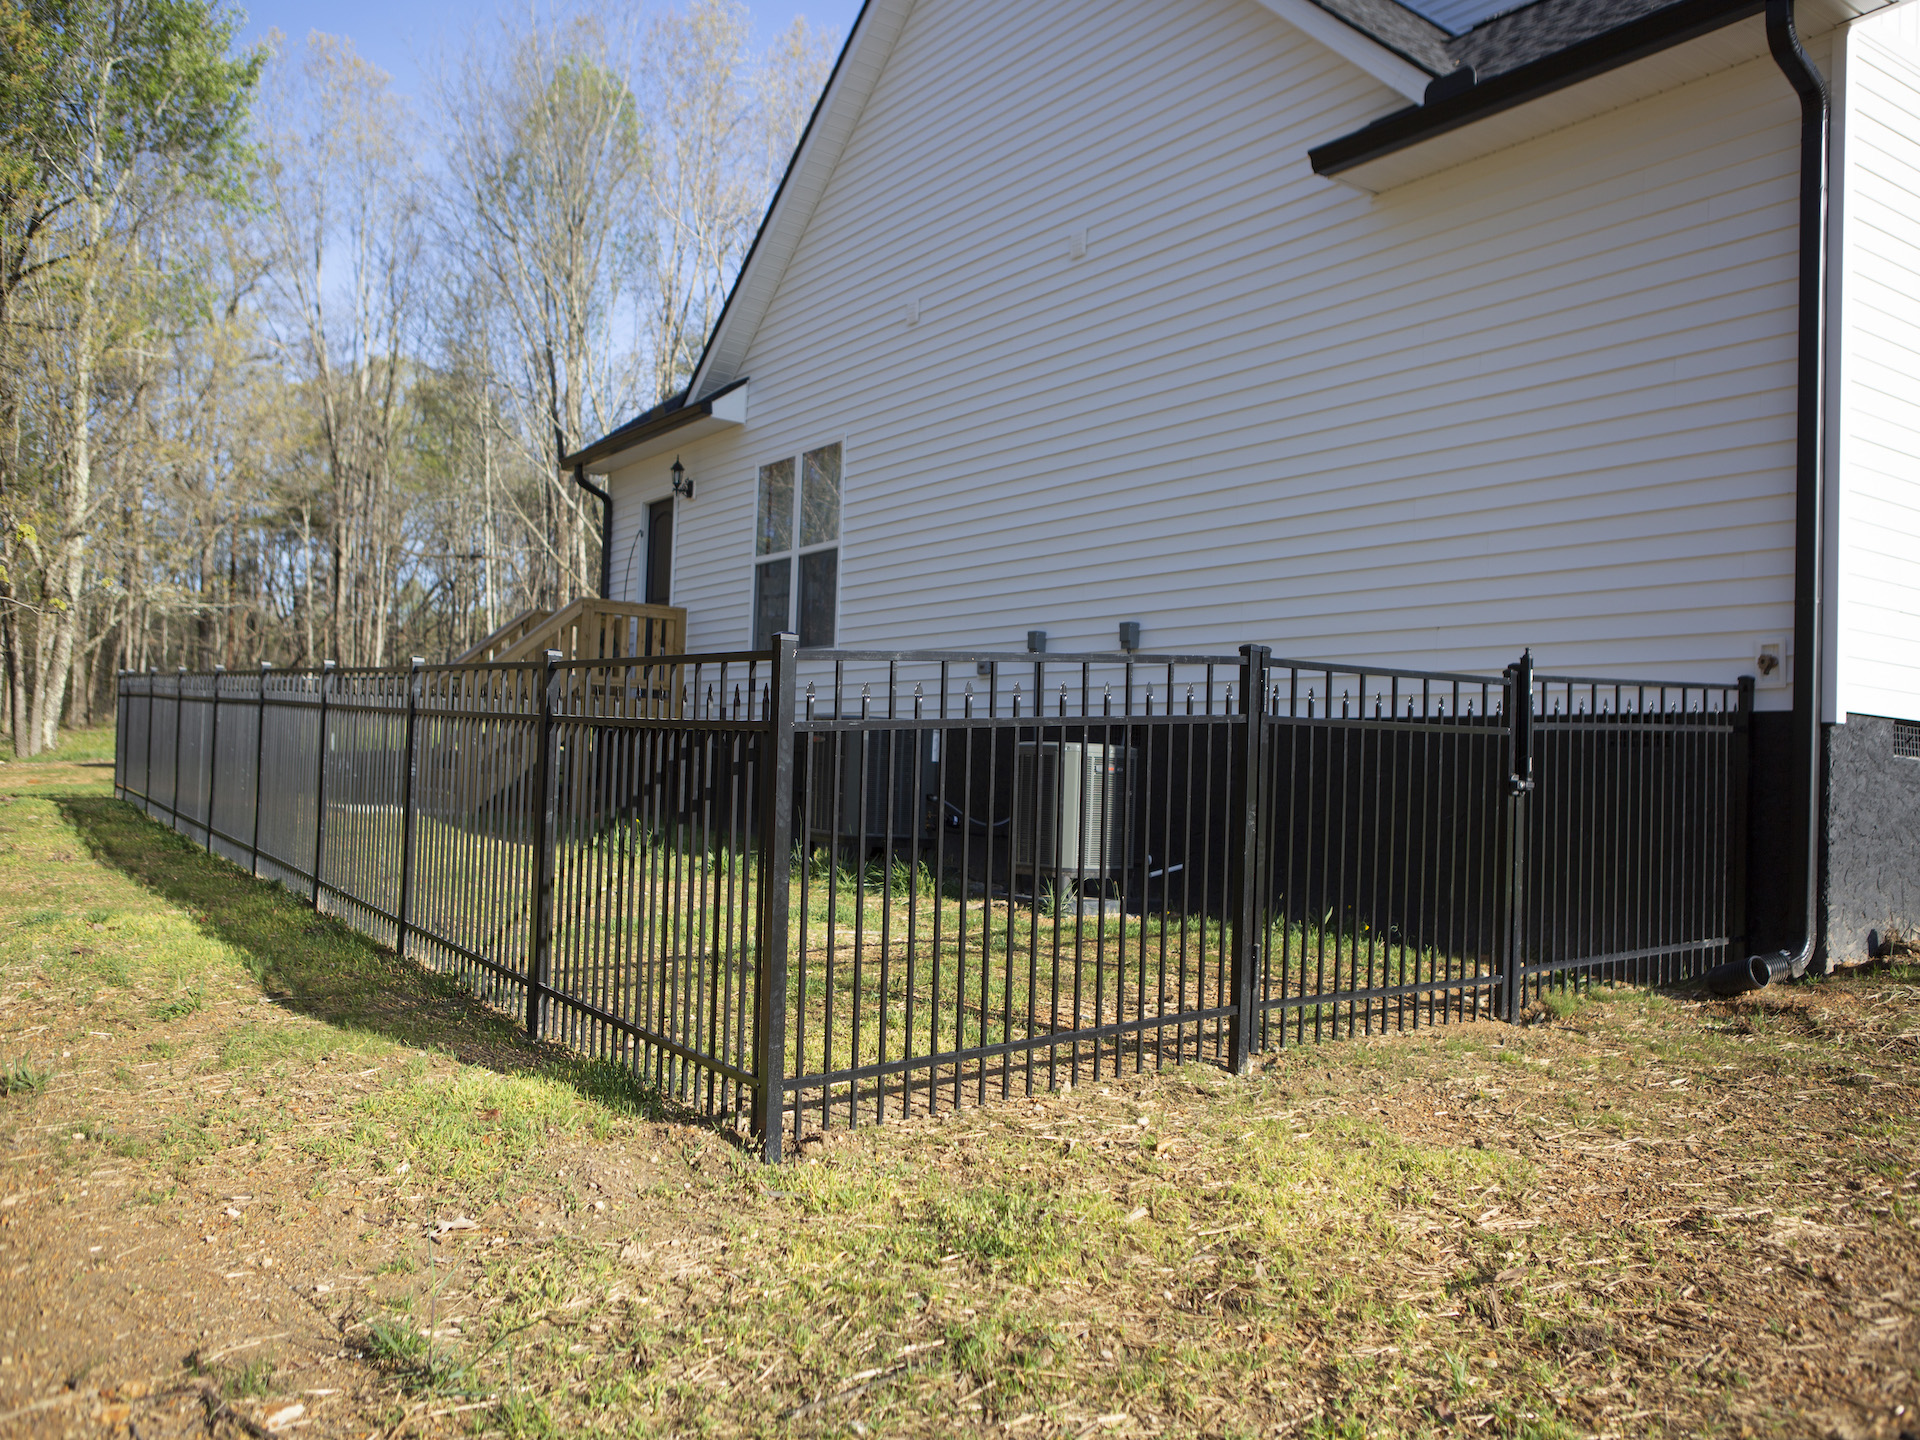 Burkhart Falls way by Knoxville fencing